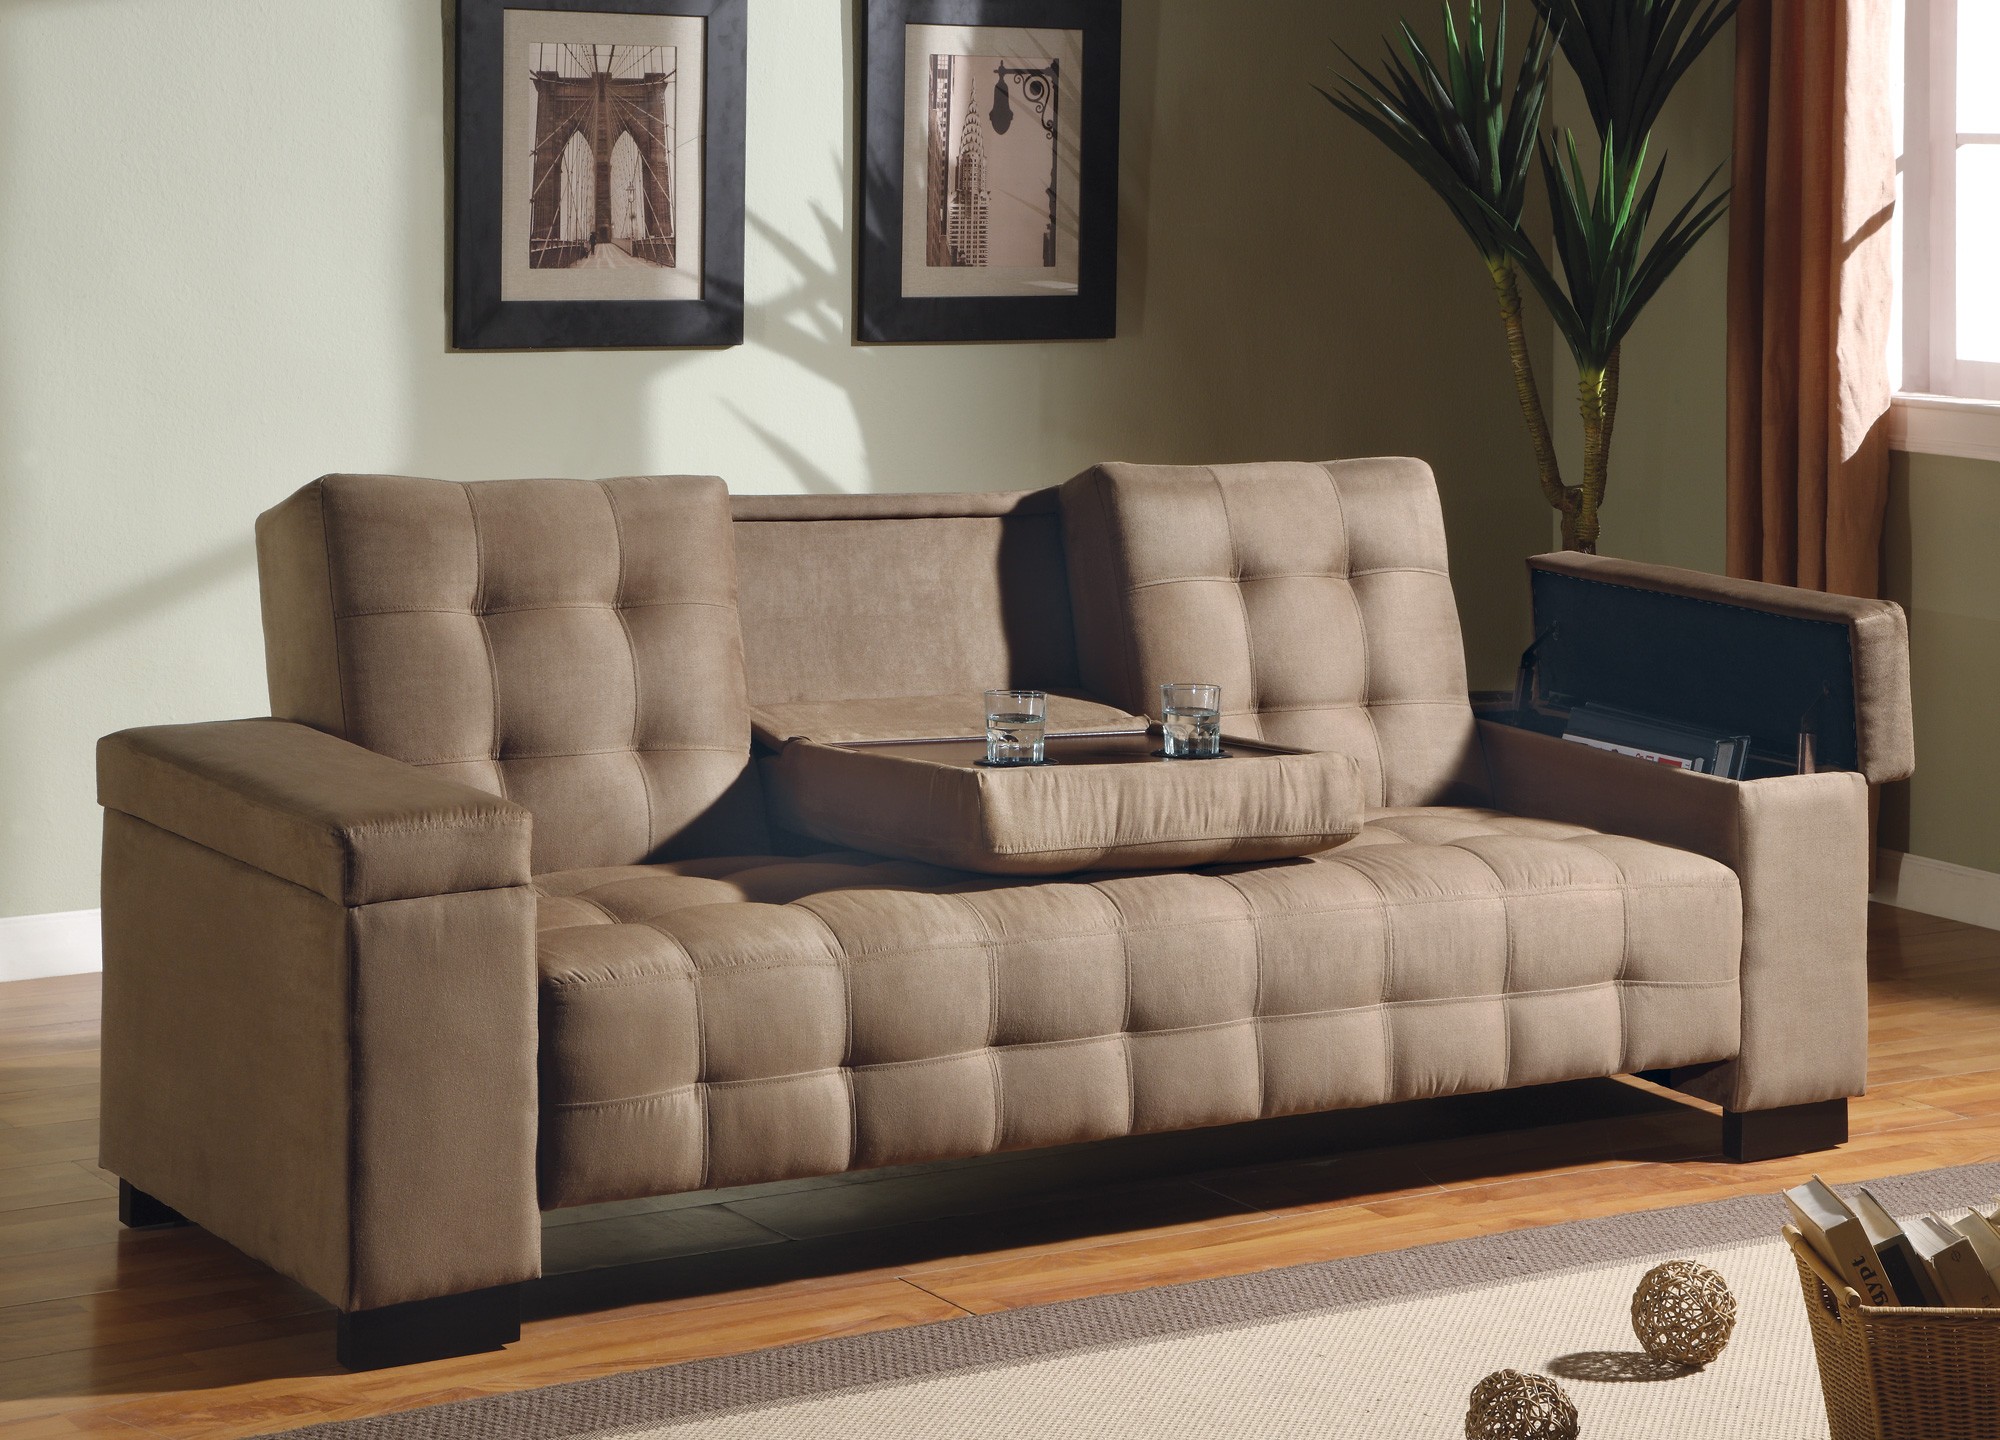 Classic Living With Amusing Classic Living Room Design With Dark Brown Colored Convertible Sofa And Light Brown Colored Wooden Veneer Of Floor Decoration Comfortable And Contemporary Convertible Sofa In Soft Color Schemes